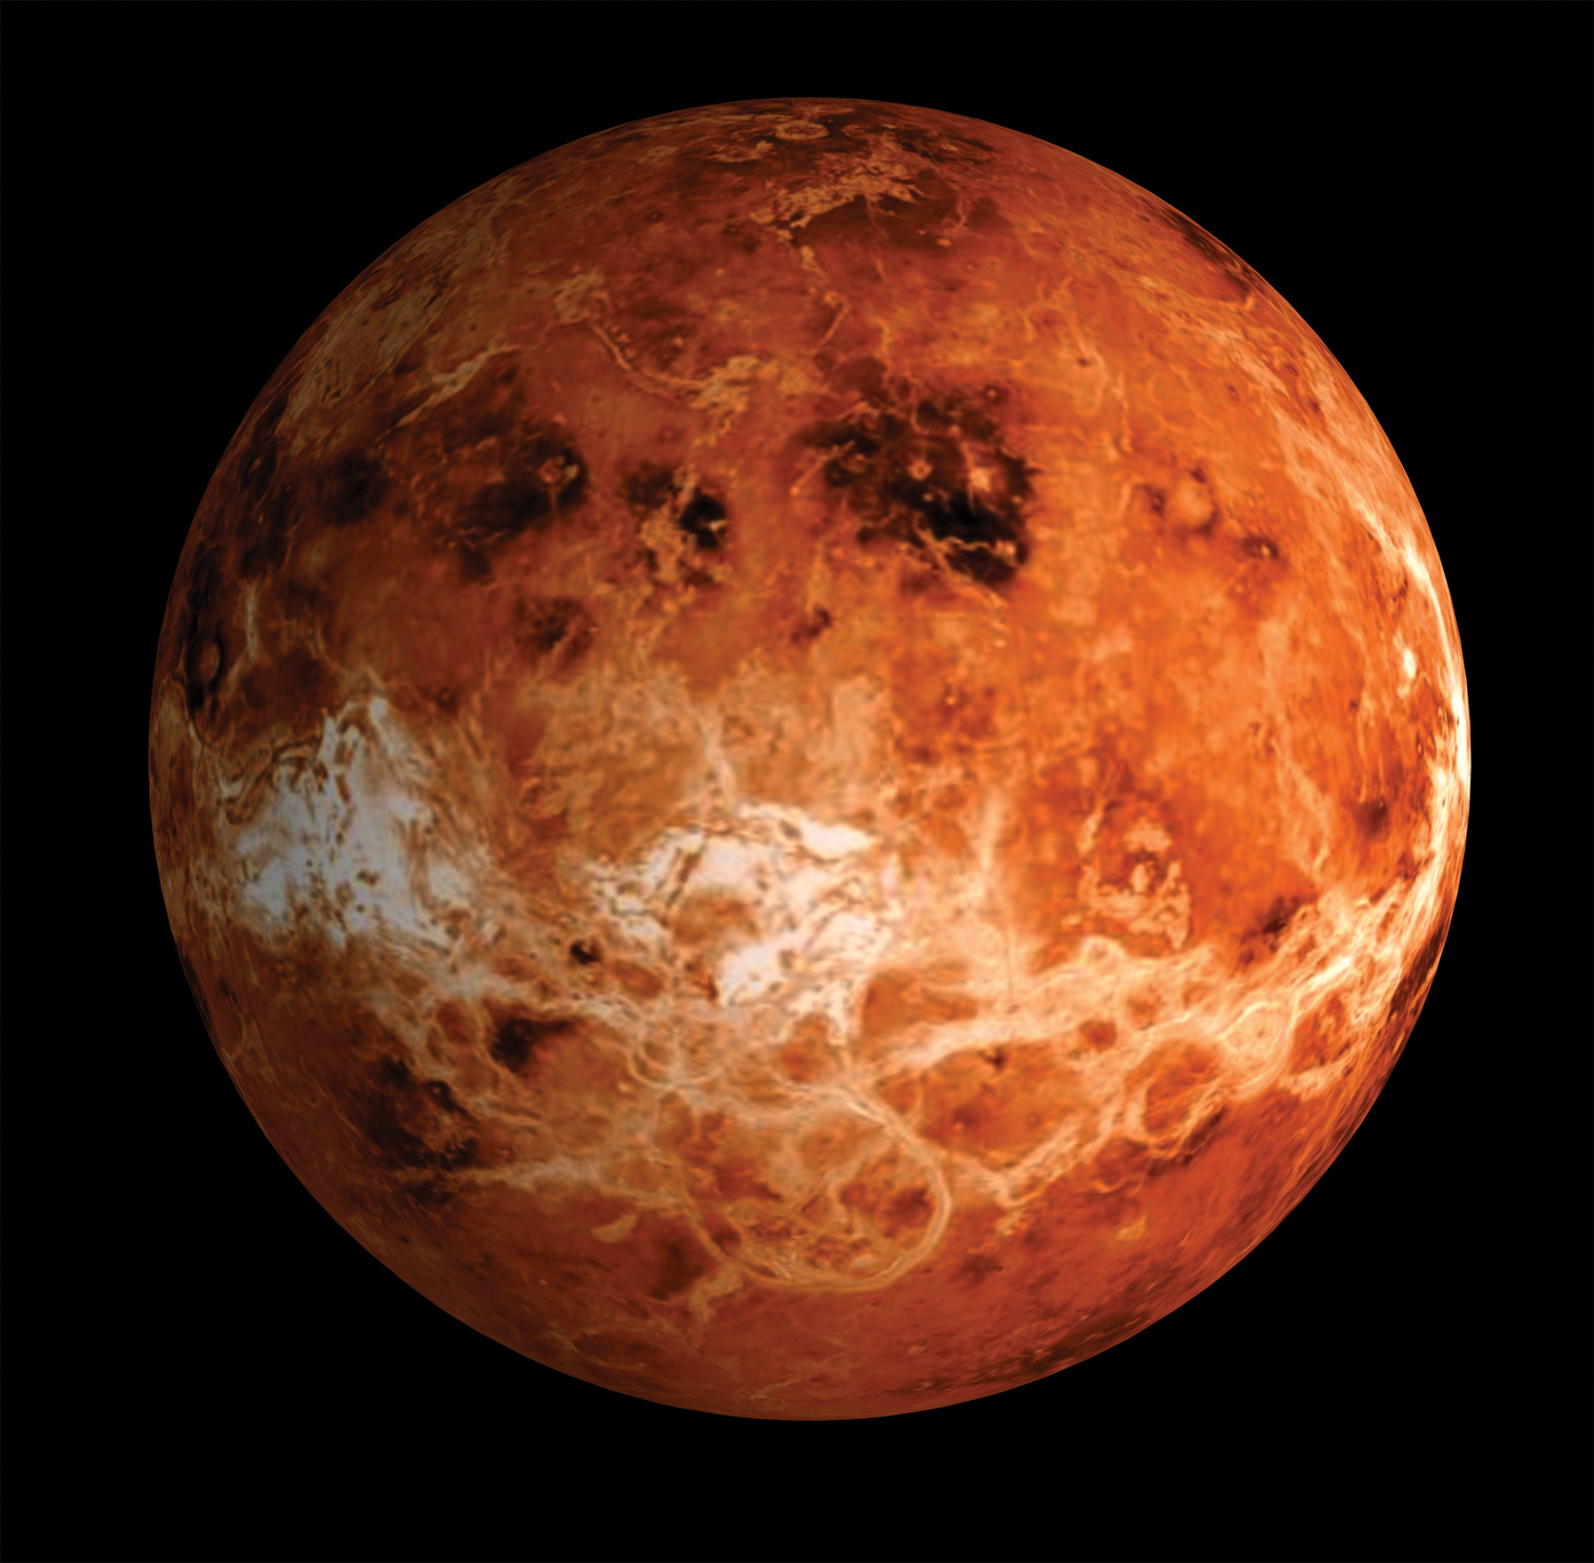 Spending one day on Venus would be longer than spending one year on 

Venus.